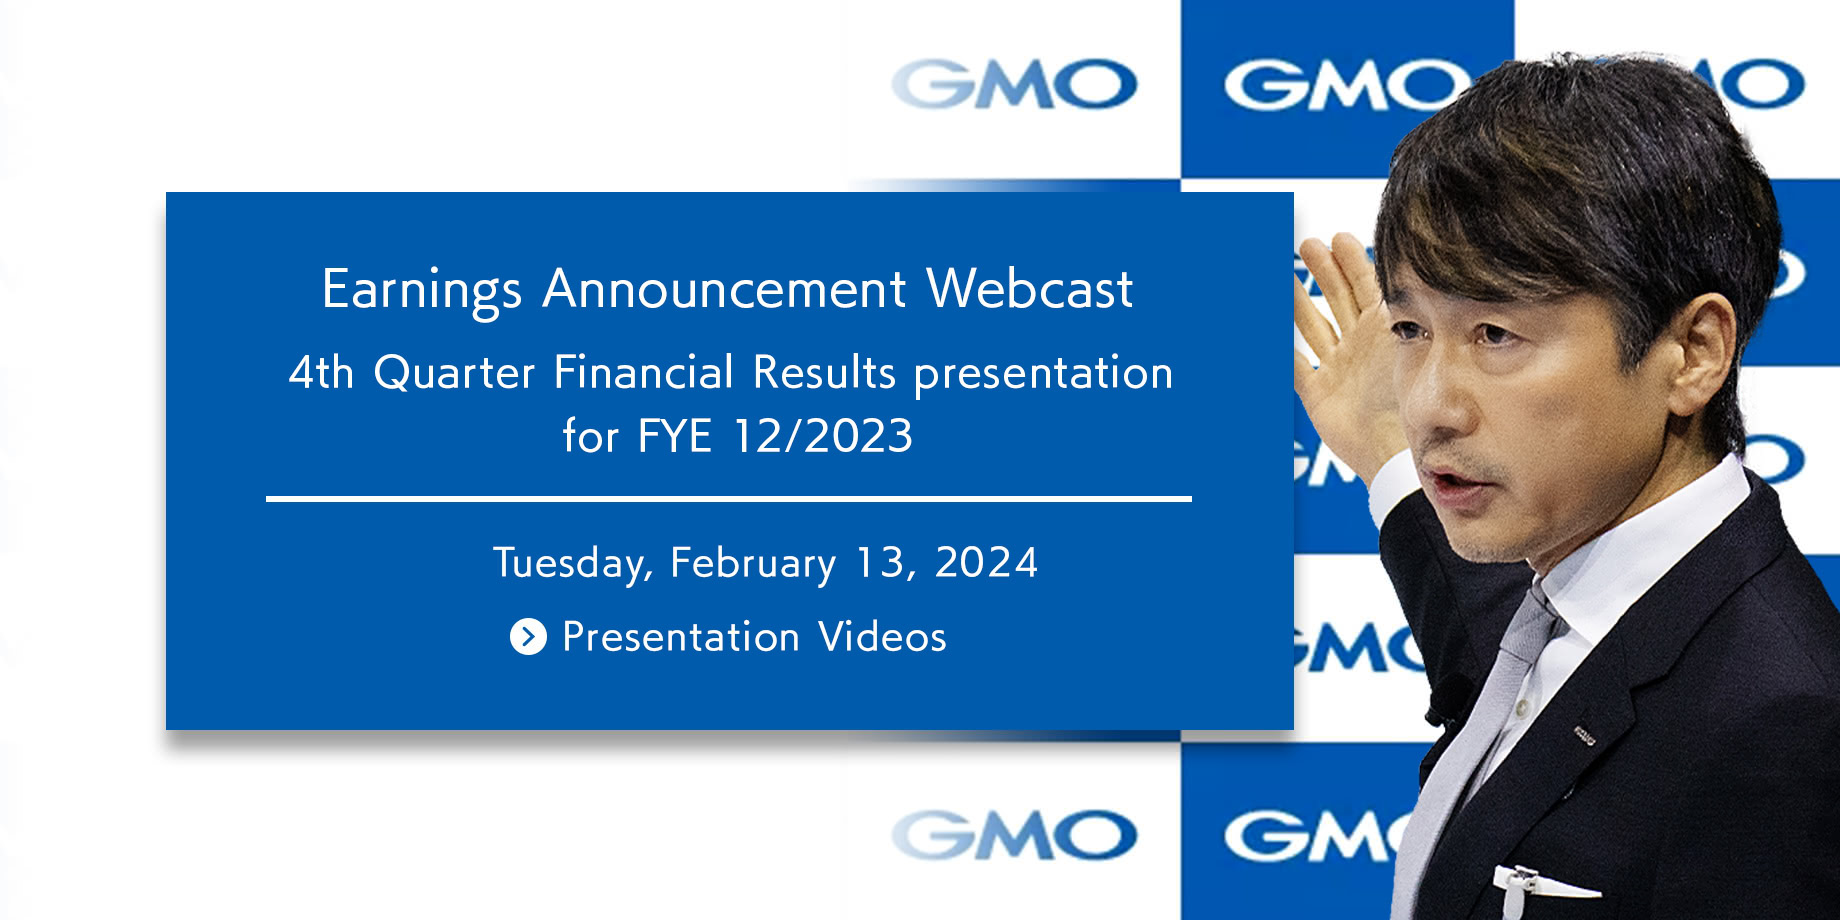 4th Quarter, Fiscal Year 2023 Earnings Announcement Webcast - Tuesday, February 13, 2024